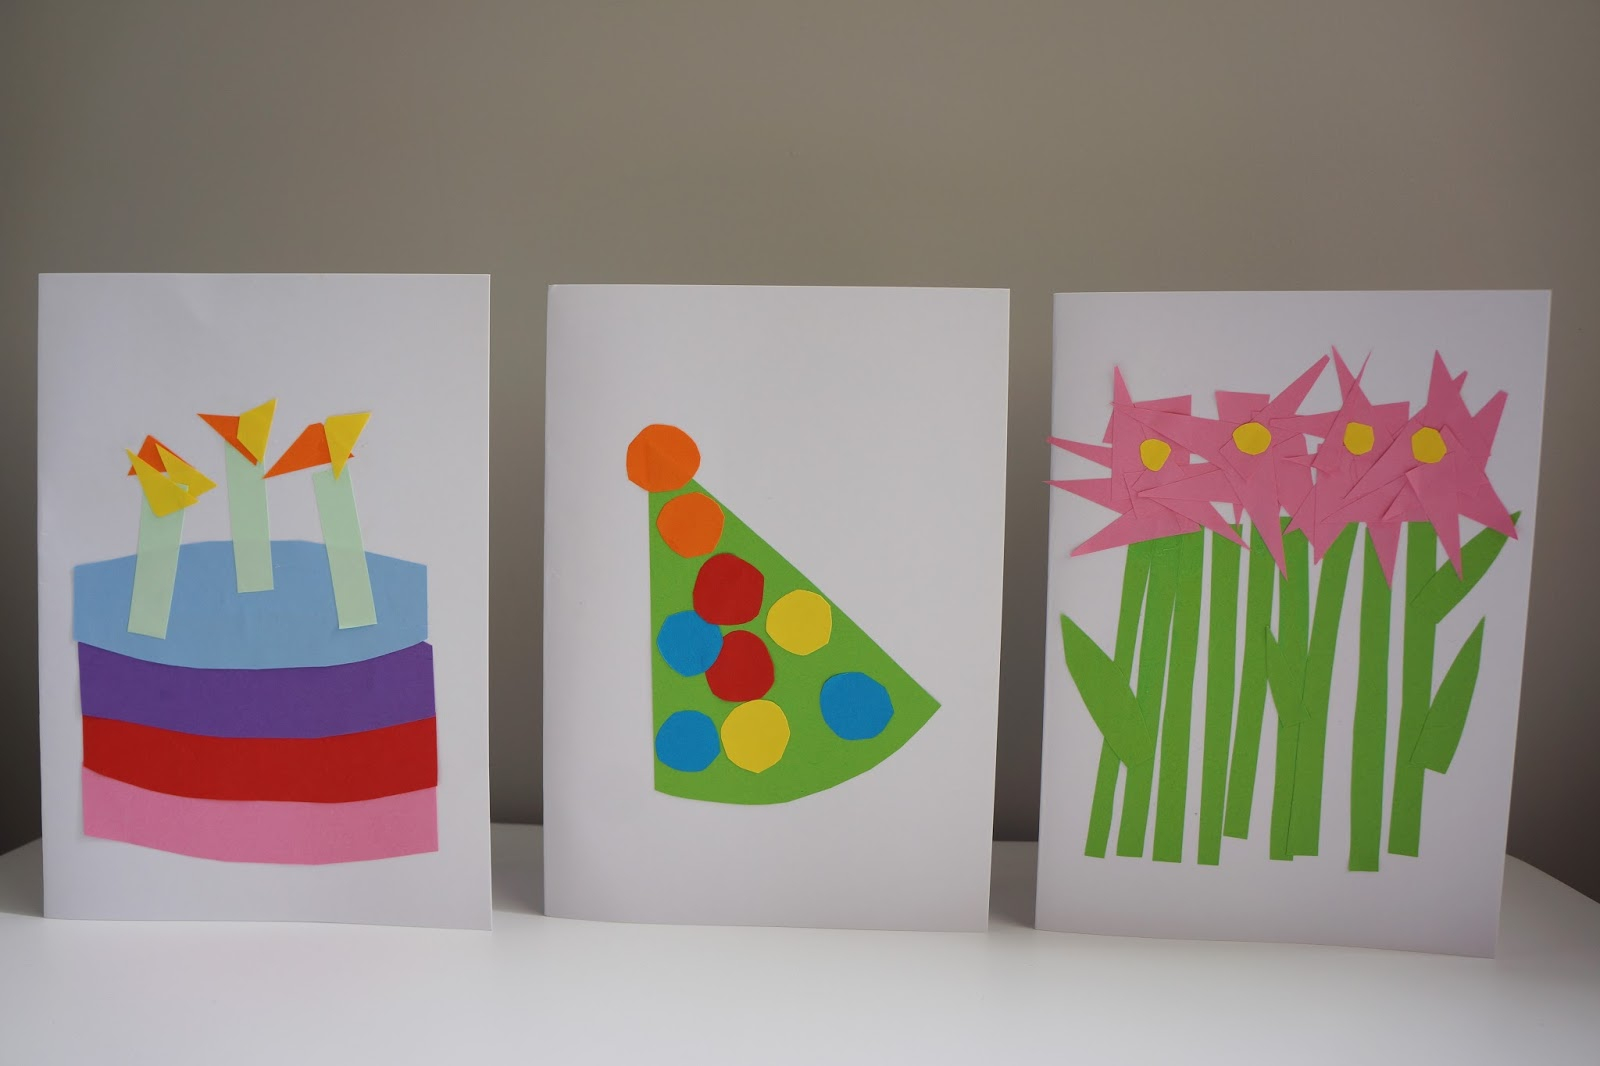 Birthday Card Ideas For Kids How To 3 Easy Birthday Card Crafts To Do With Toddlers Wave To Mummy